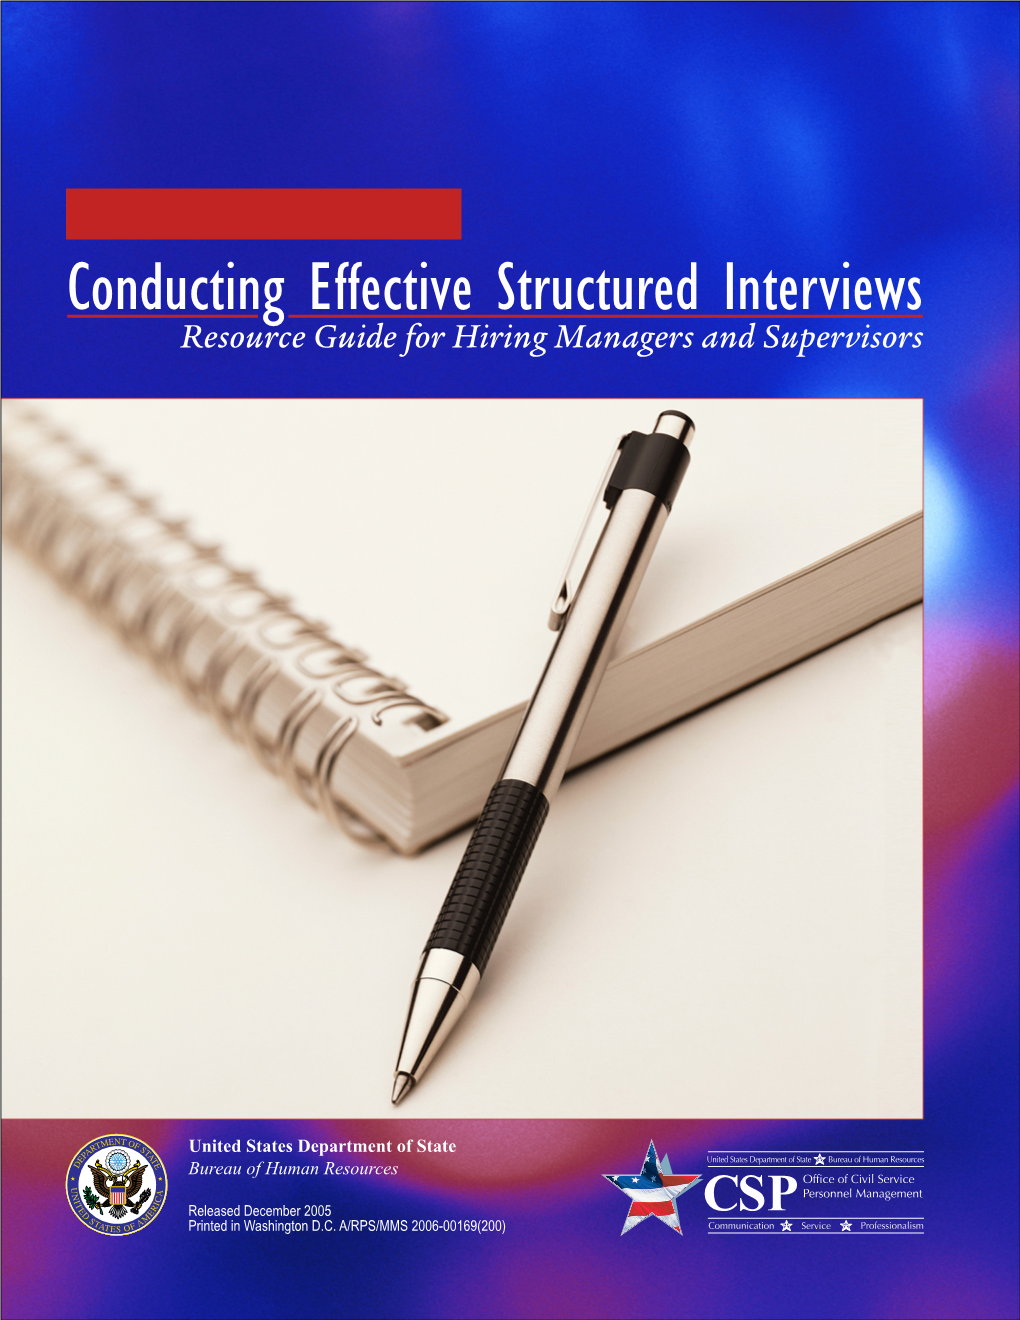 Conducting Effective Structured Interviews Resource Guide for Hiring Managers and Supervisors